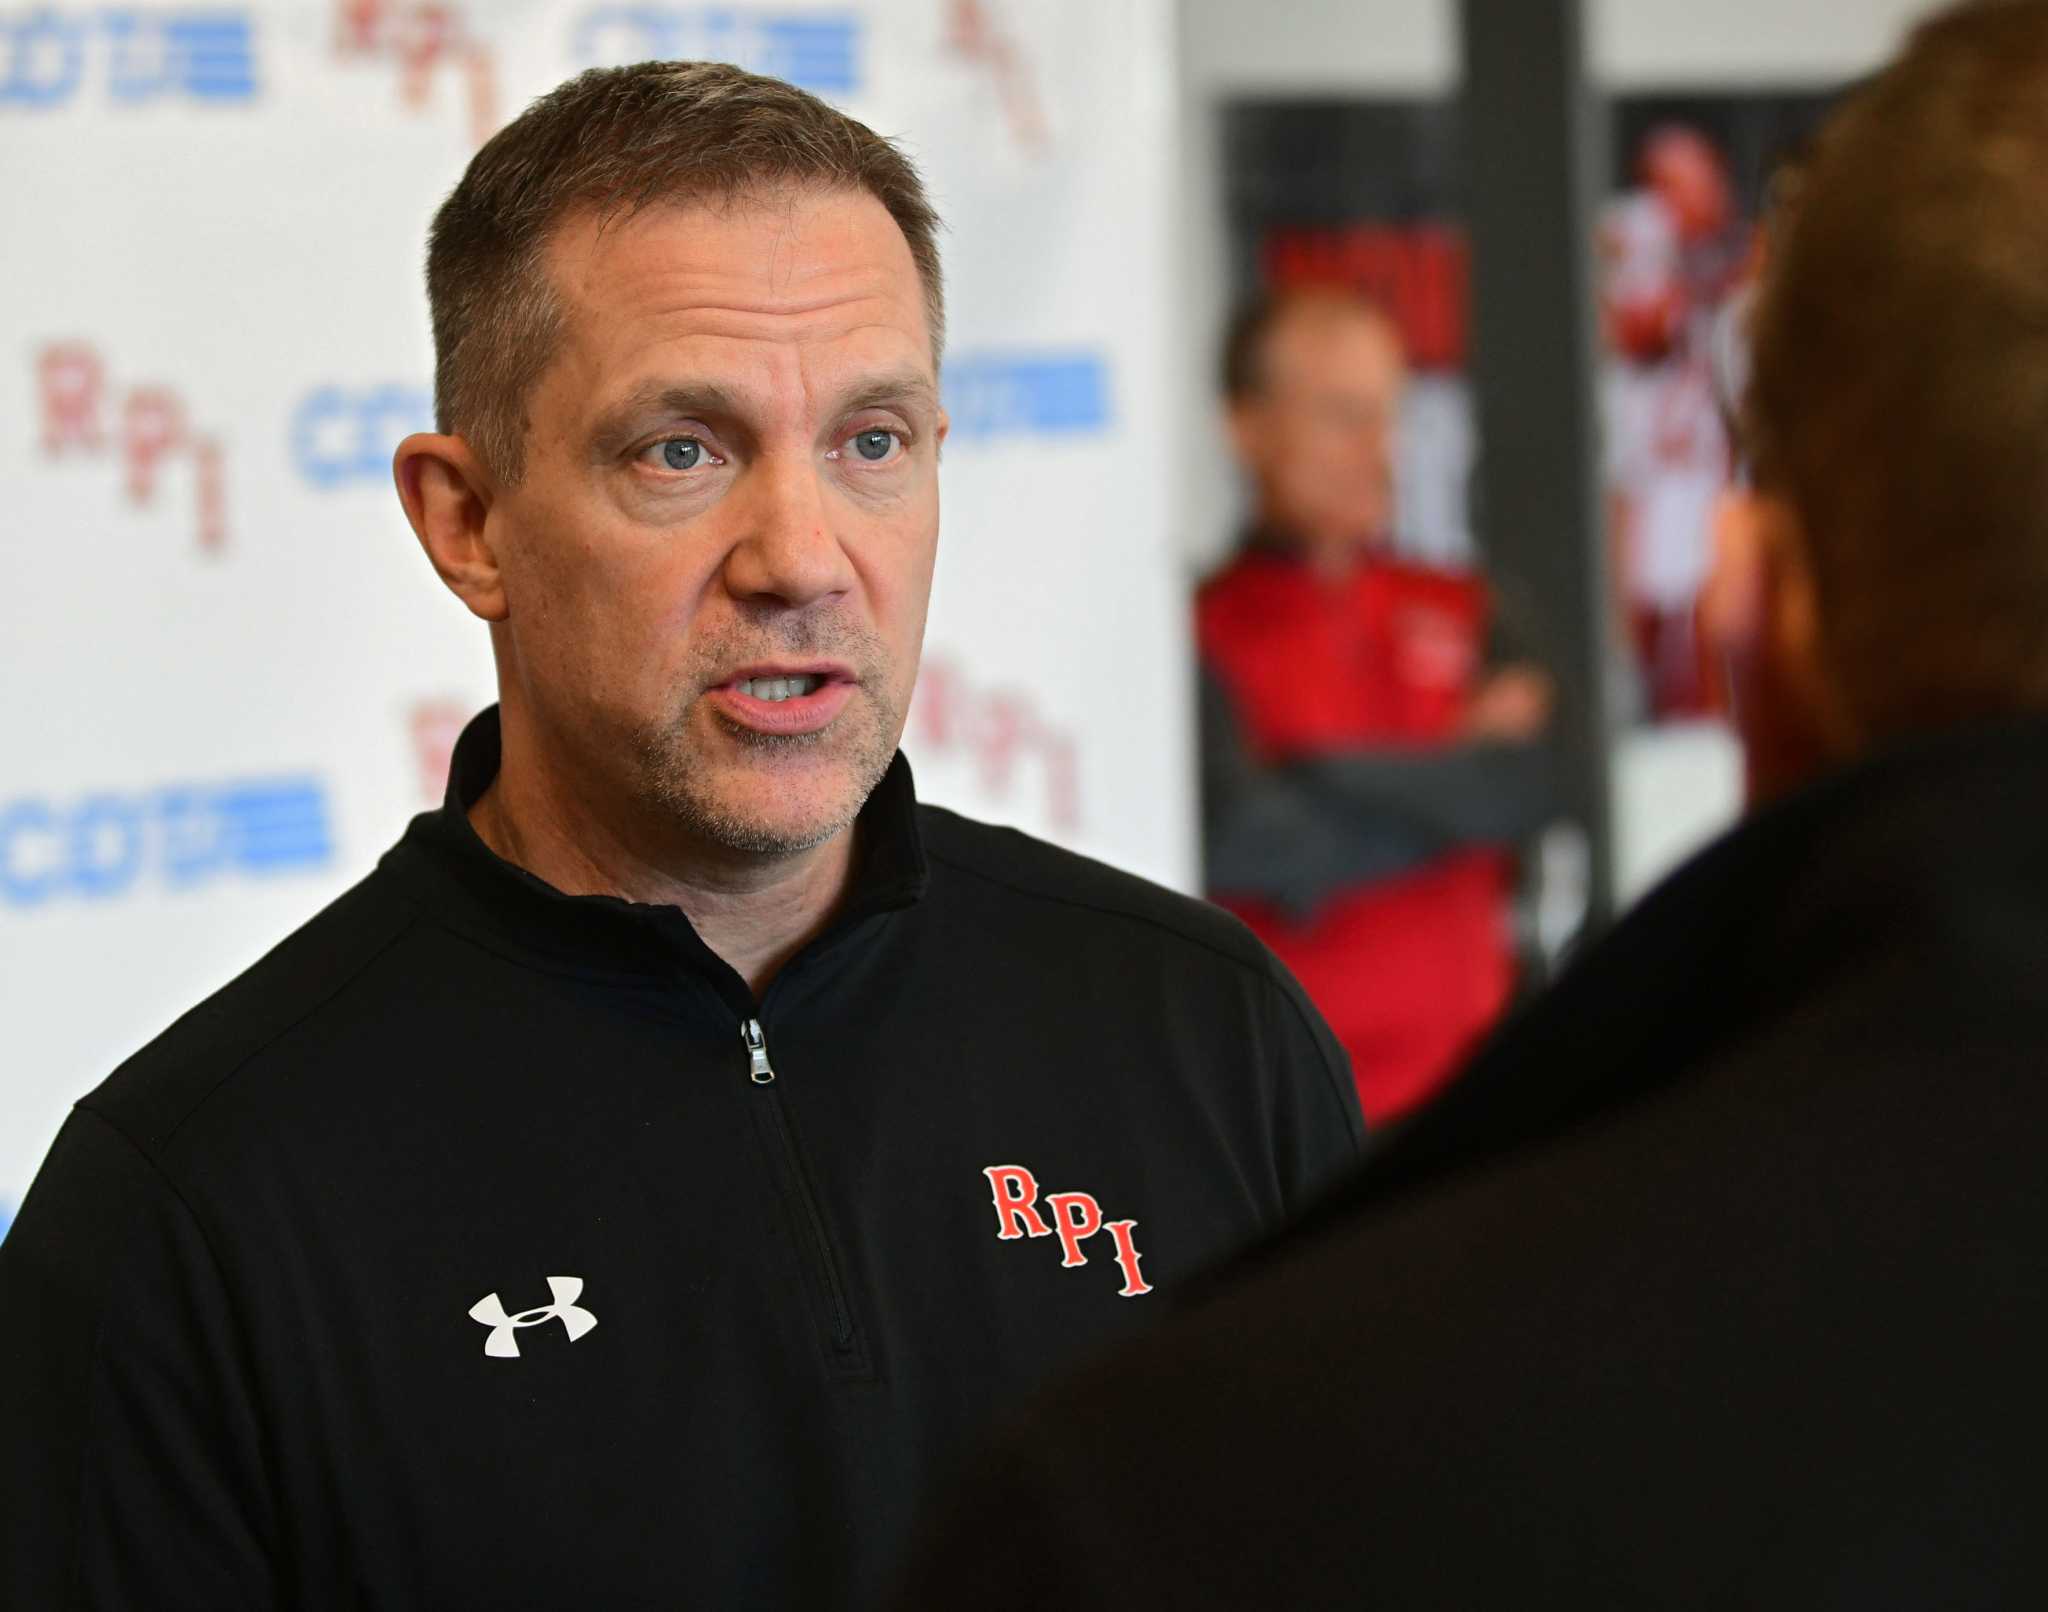 RPI athletics not allowing fans from outside campus to attend games